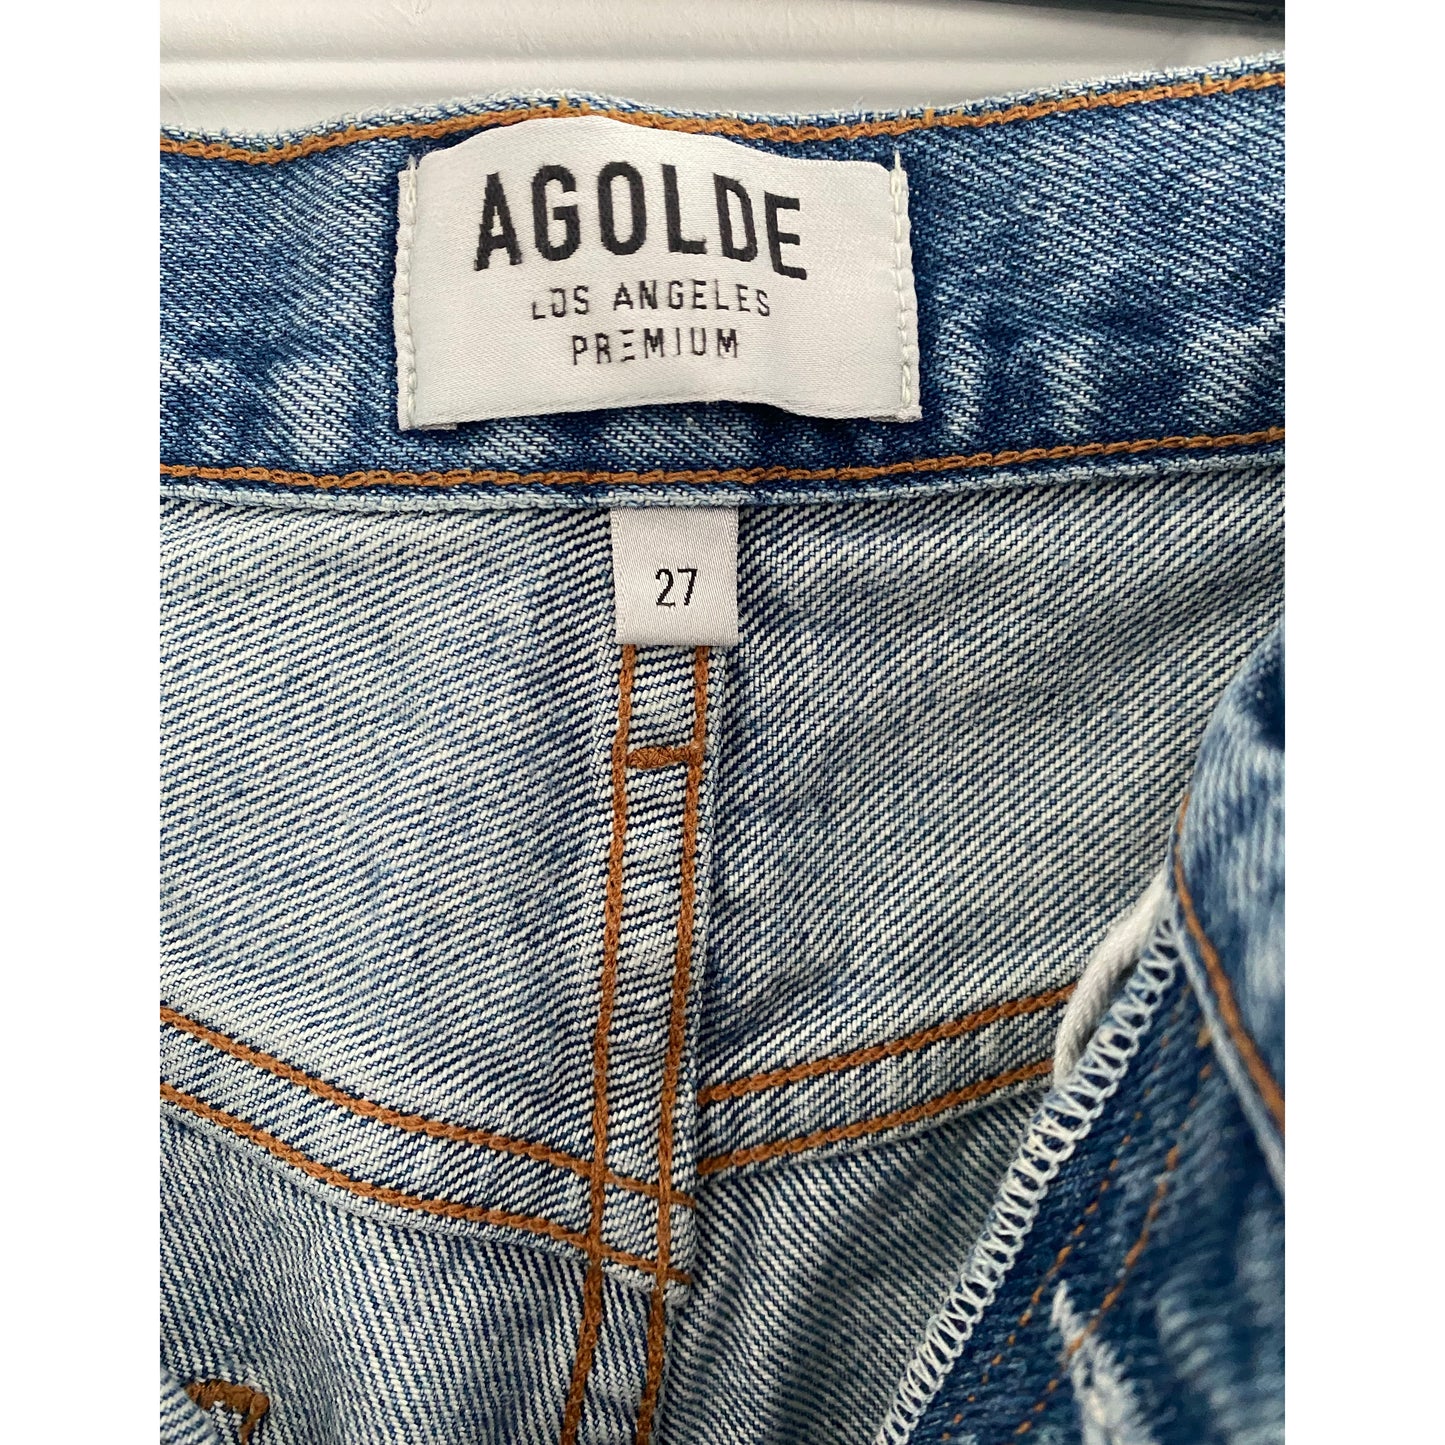 AGOLDE 90's Denim Shorts in "Runabout", size 27